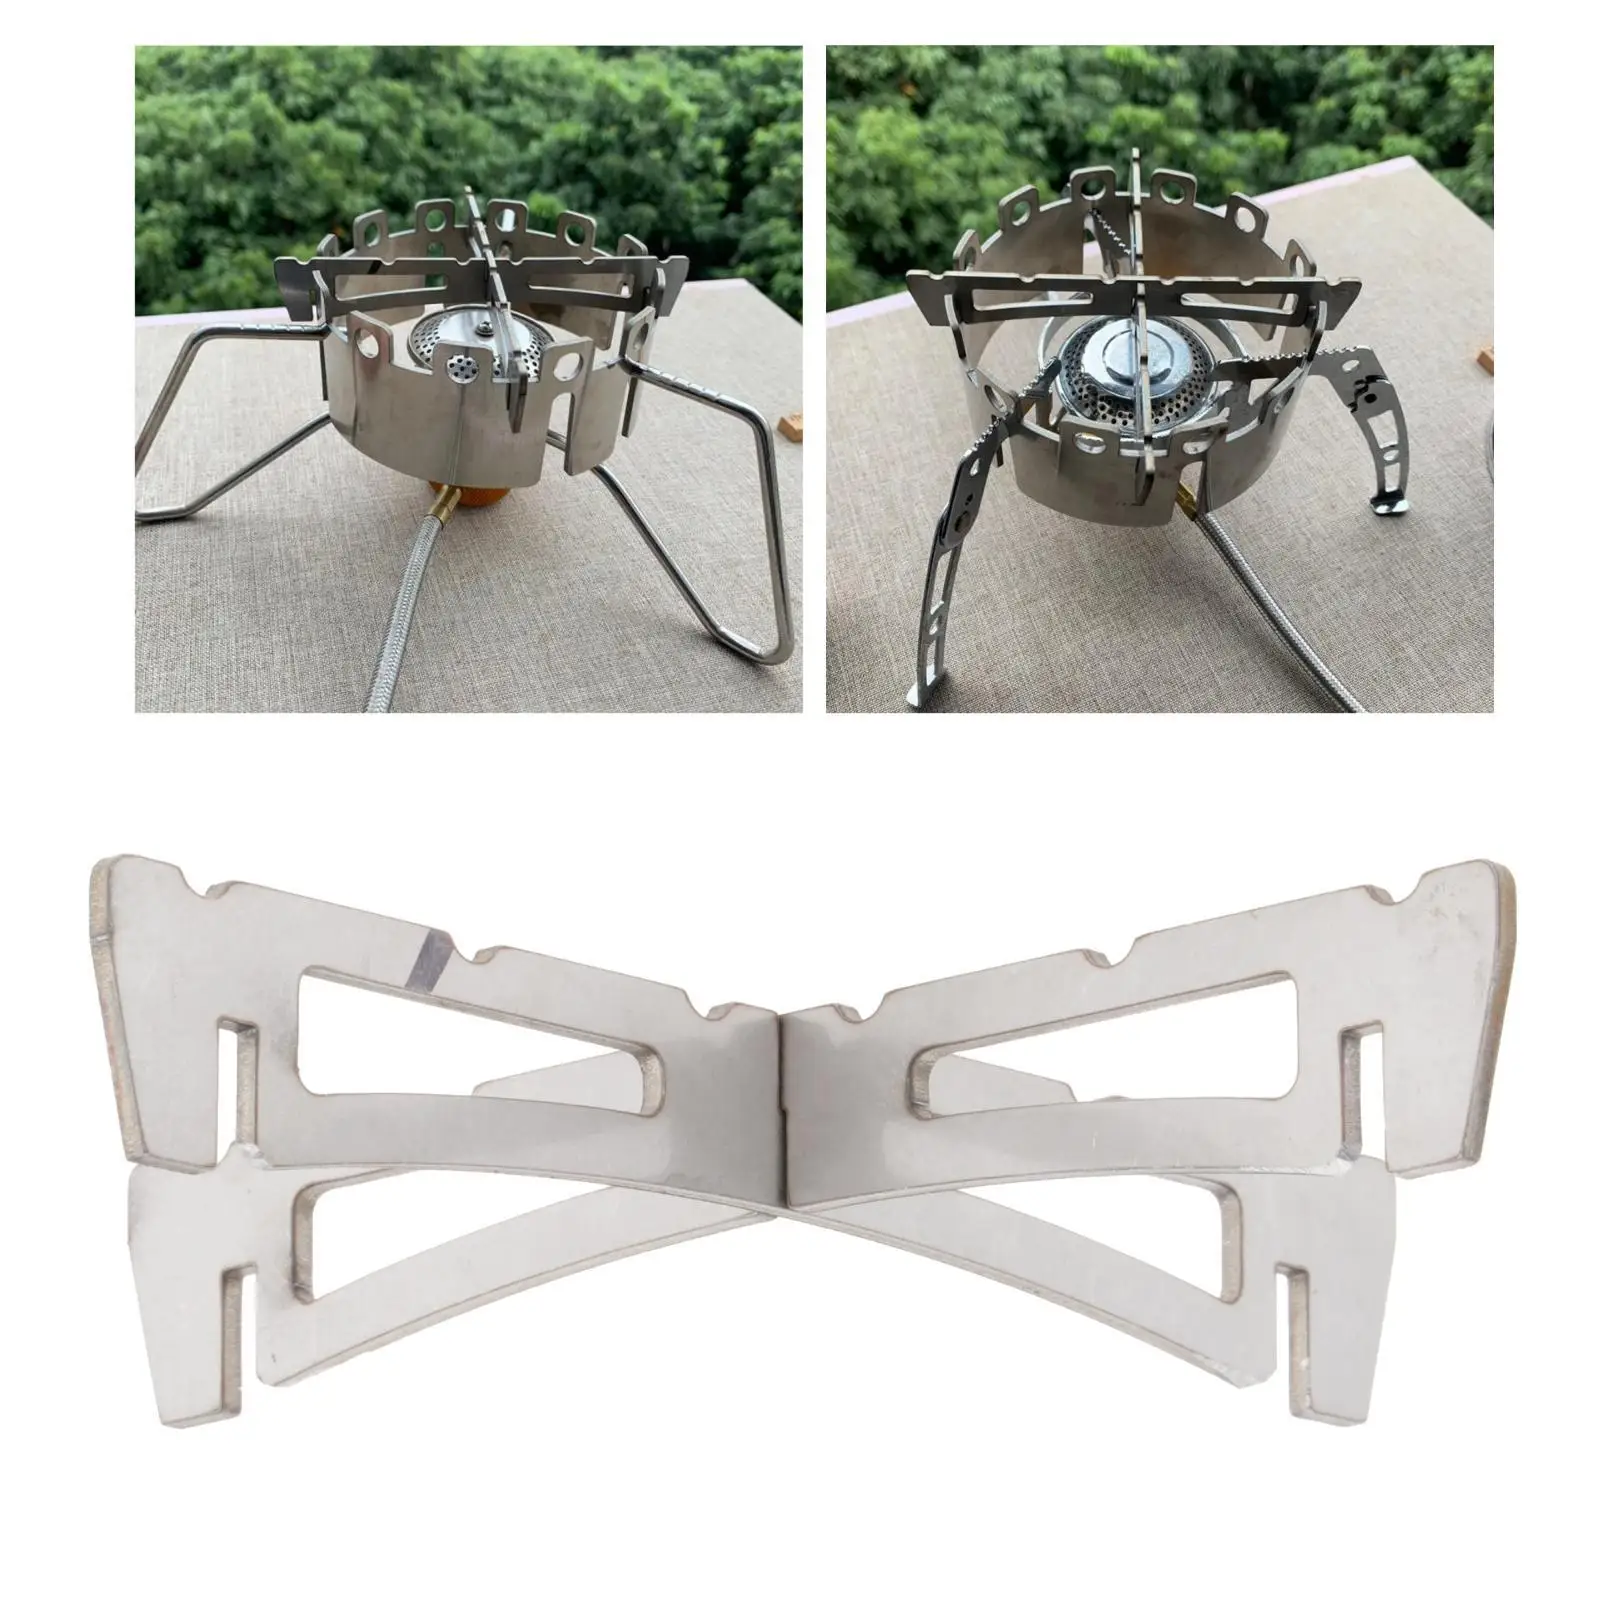  Stove  Stand Foldable  Support Stand Holder for Hiking Camping